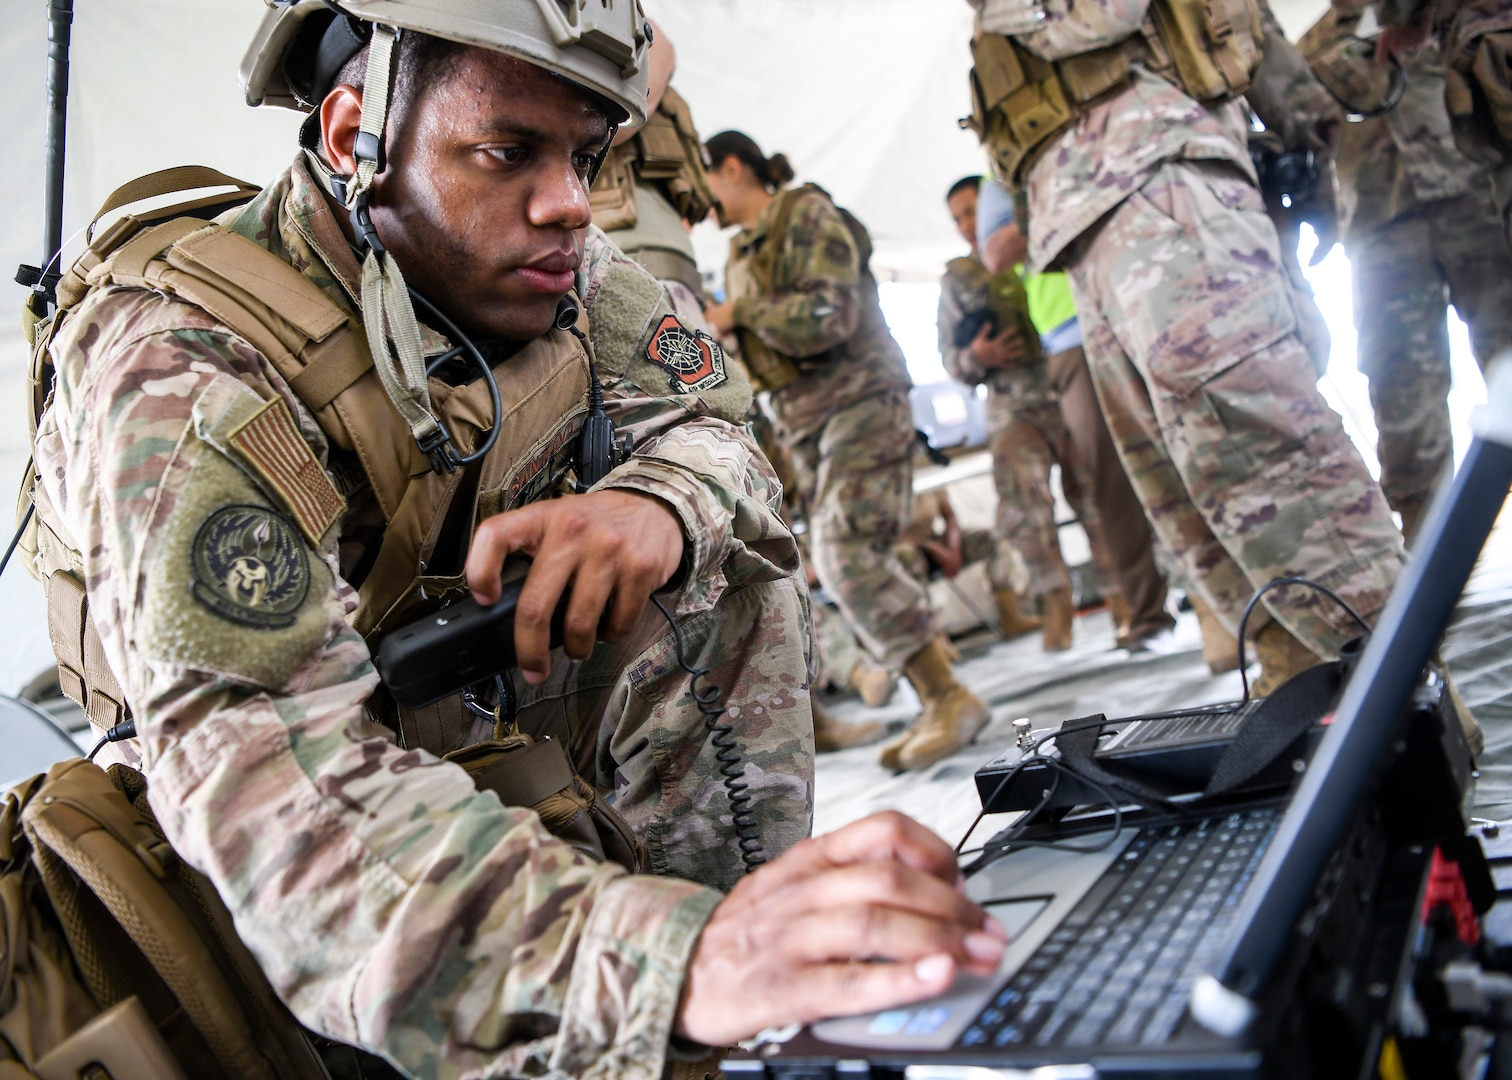 621st CRW teams up with joint partners in 'Southeast Asia' for exercise